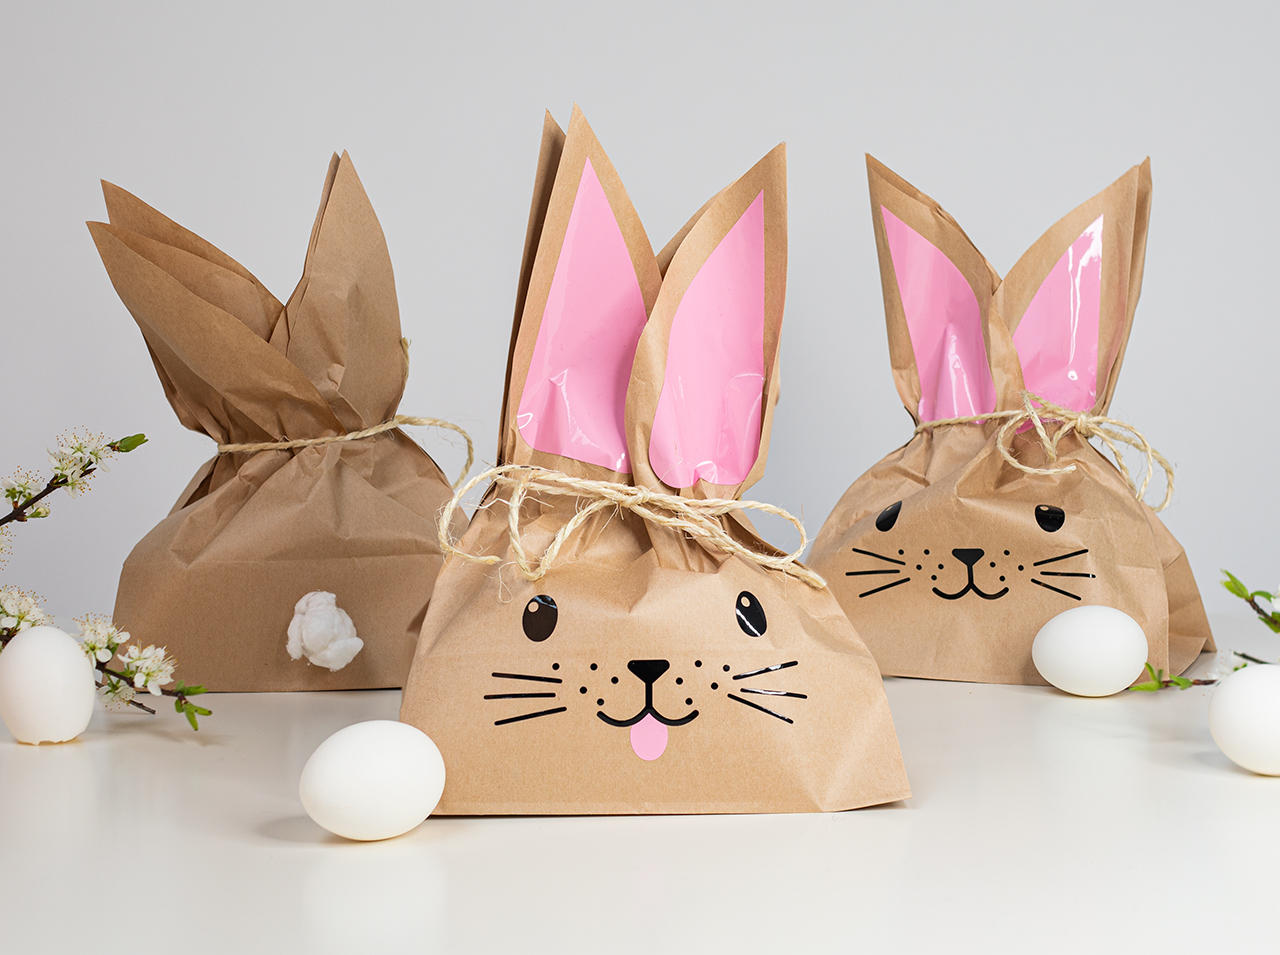 Brown paper bag with rabbit ears and a laughing face.